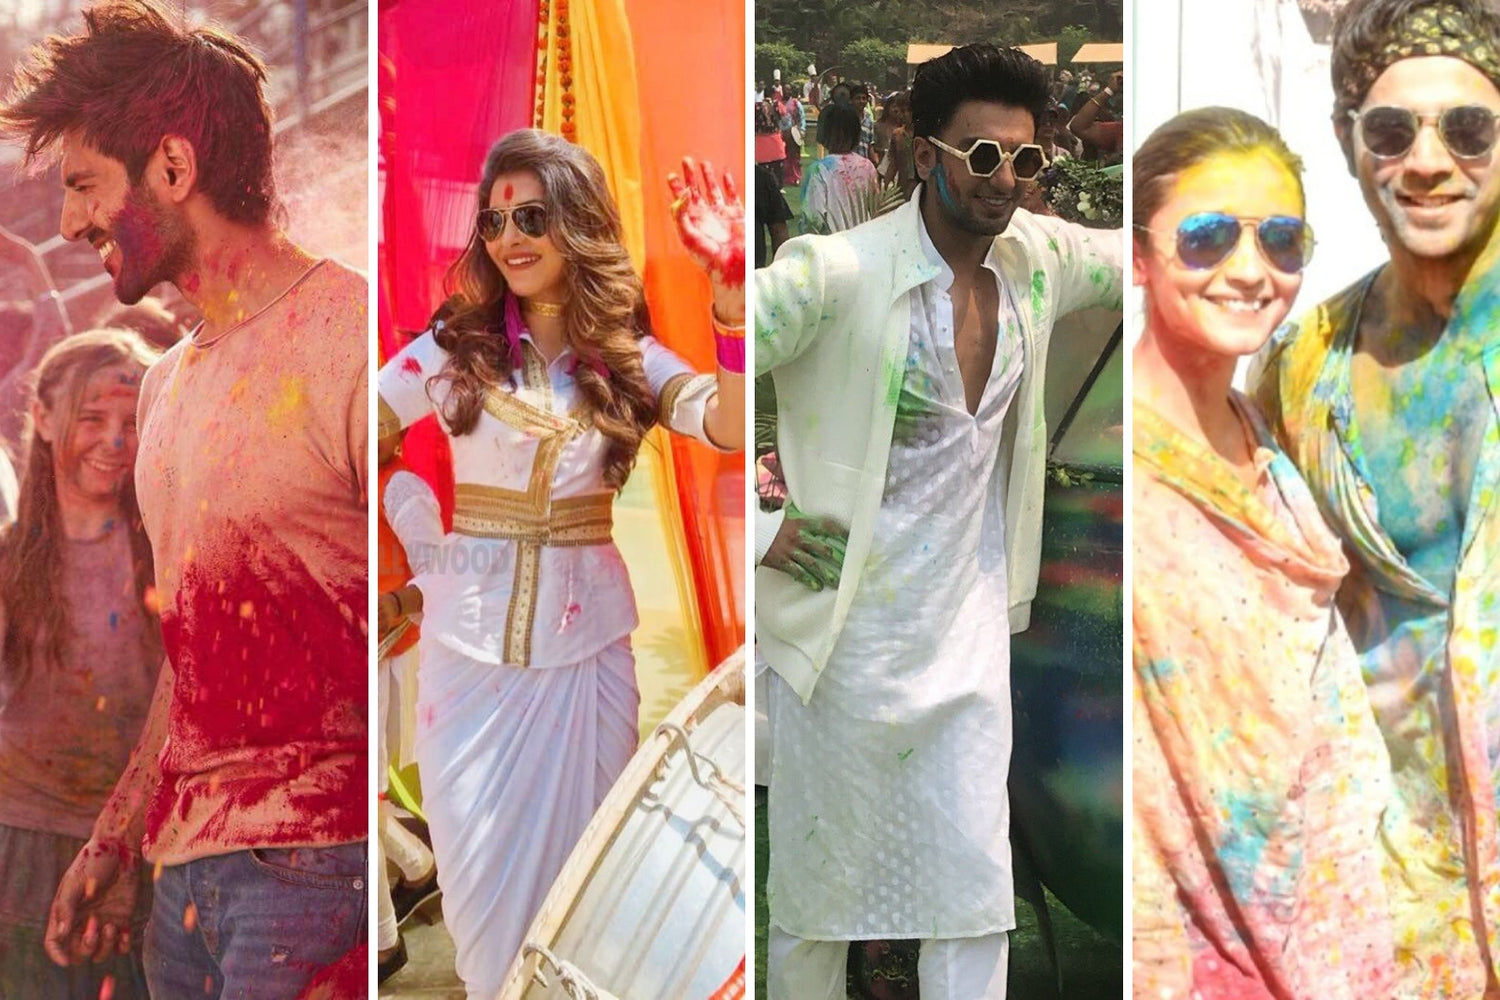 Catch all the Madness & Fashion Inspirations at Bollywood Holi Parties - Fabriclore